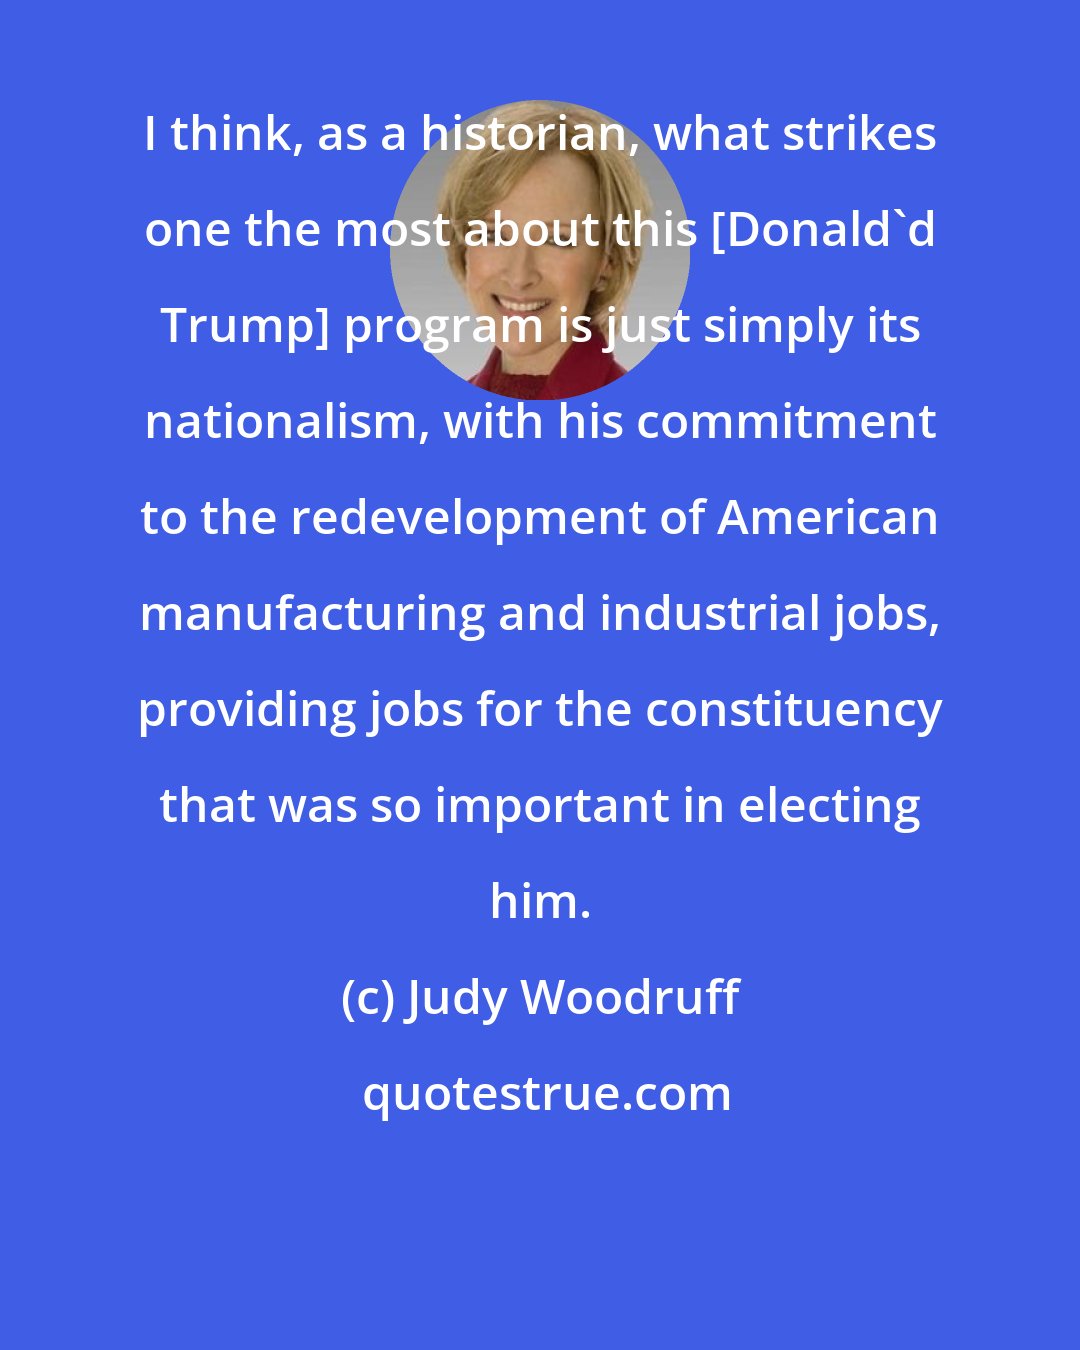 Judy Woodruff: I think, as a historian, what strikes one the most about this [Donald'd Trump] program is just simply its nationalism, with his commitment to the redevelopment of American manufacturing and industrial jobs, providing jobs for the constituency that was so important in electing him.